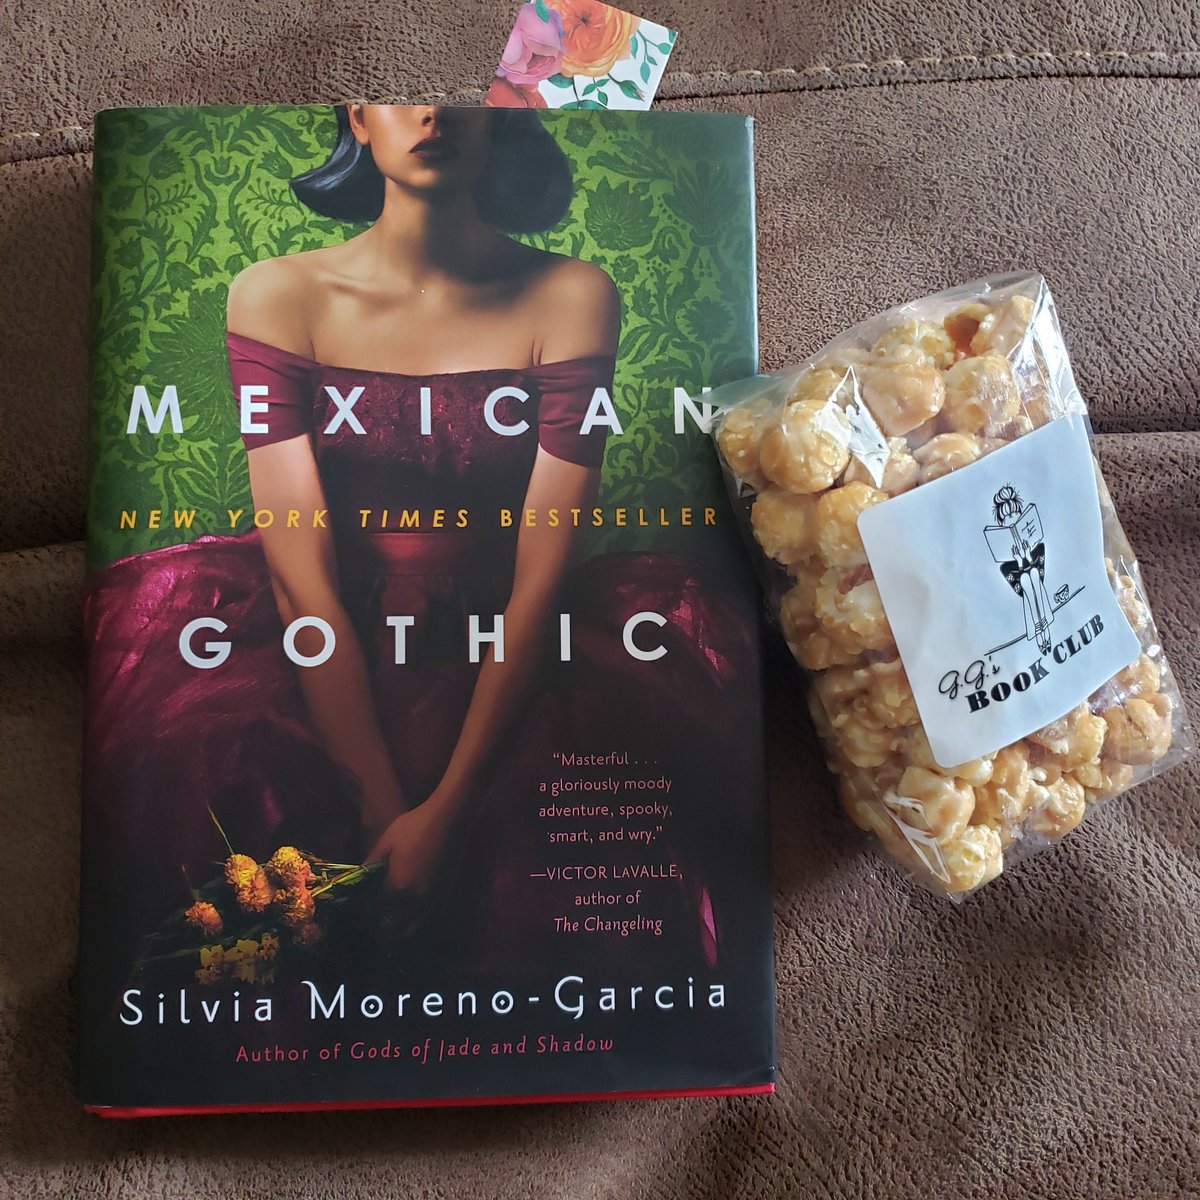 Ready to start my October reading!  #GGsBook #MexicanGothic